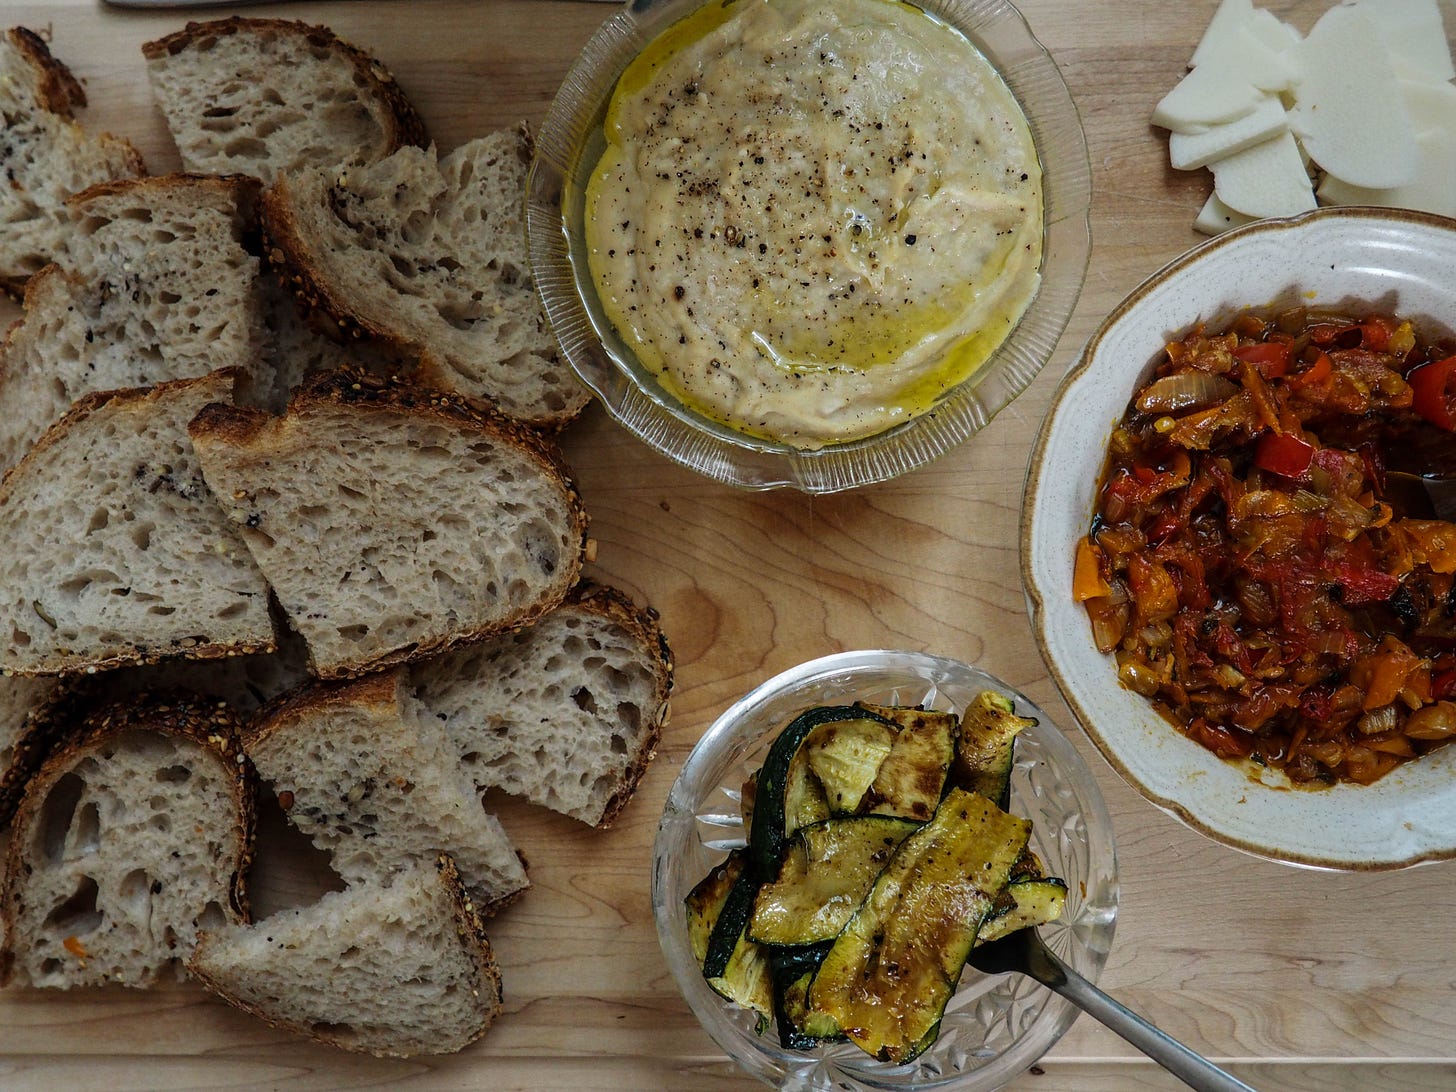 A spread on a cutting board. Bread to the left. In the centre there are two bowls. On top is a bowl with the white bean dip which is beige in colour and drizzled with olive oil. On the bottom is a bowl of grilled zucchinis. To the right is the final bowl which is filled with a red pepper dip. Above the red pepper dip are a few slices of a hard white began cheese.